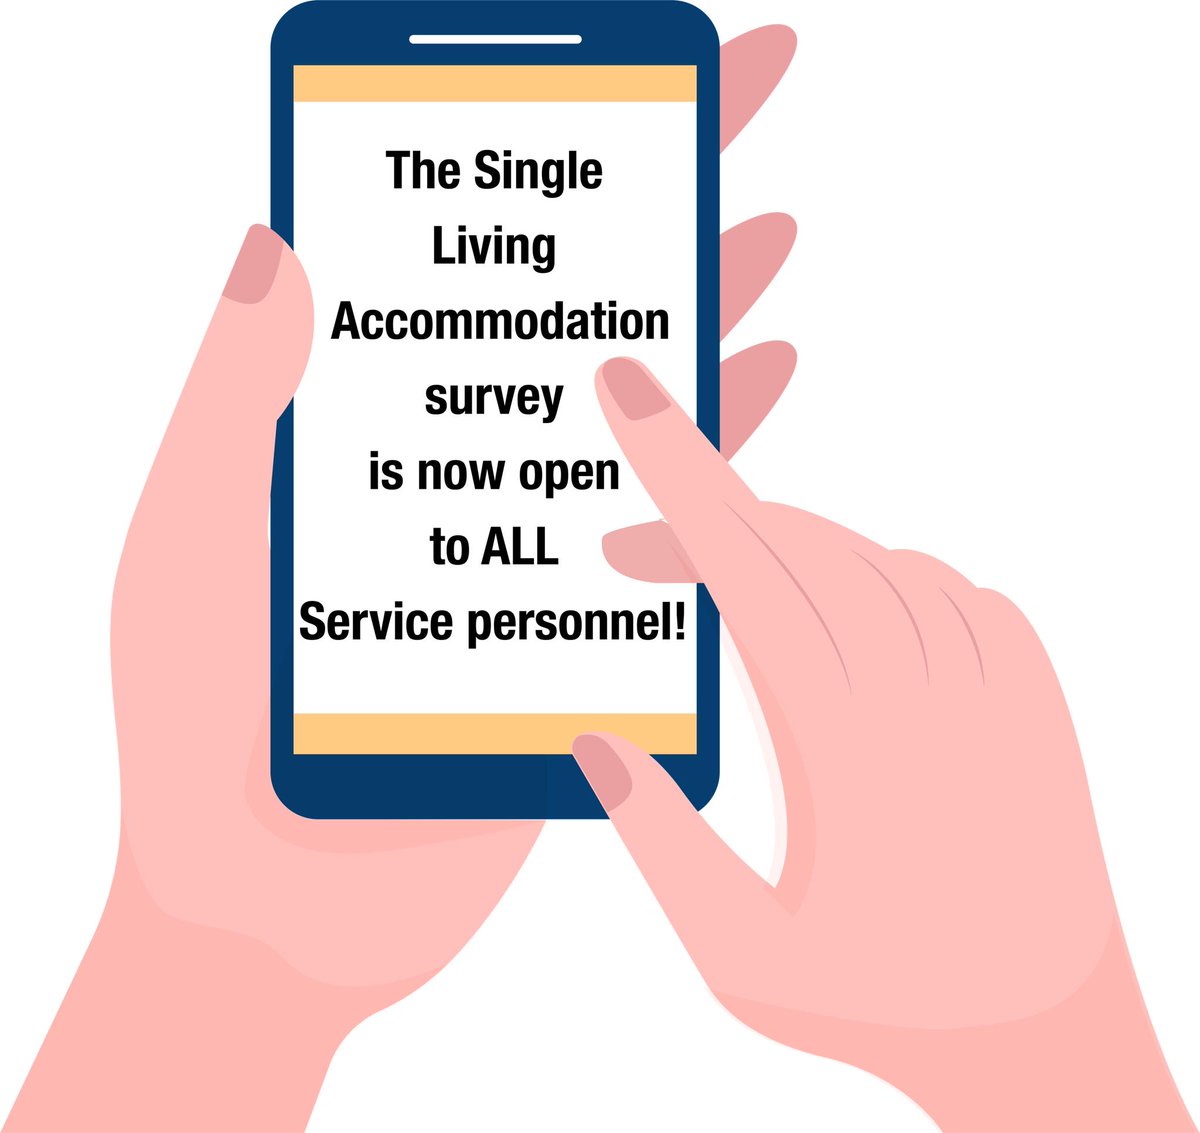 Defence Accommodation Policy - We need to hear from you! The Single Living Accommodation survey is now open to all Service personnel. Share your views and help shape the future of Single Living Accommodation. ow.ly/k3W250RtZSF @RAFHIVE @Defence Accommodation Policy